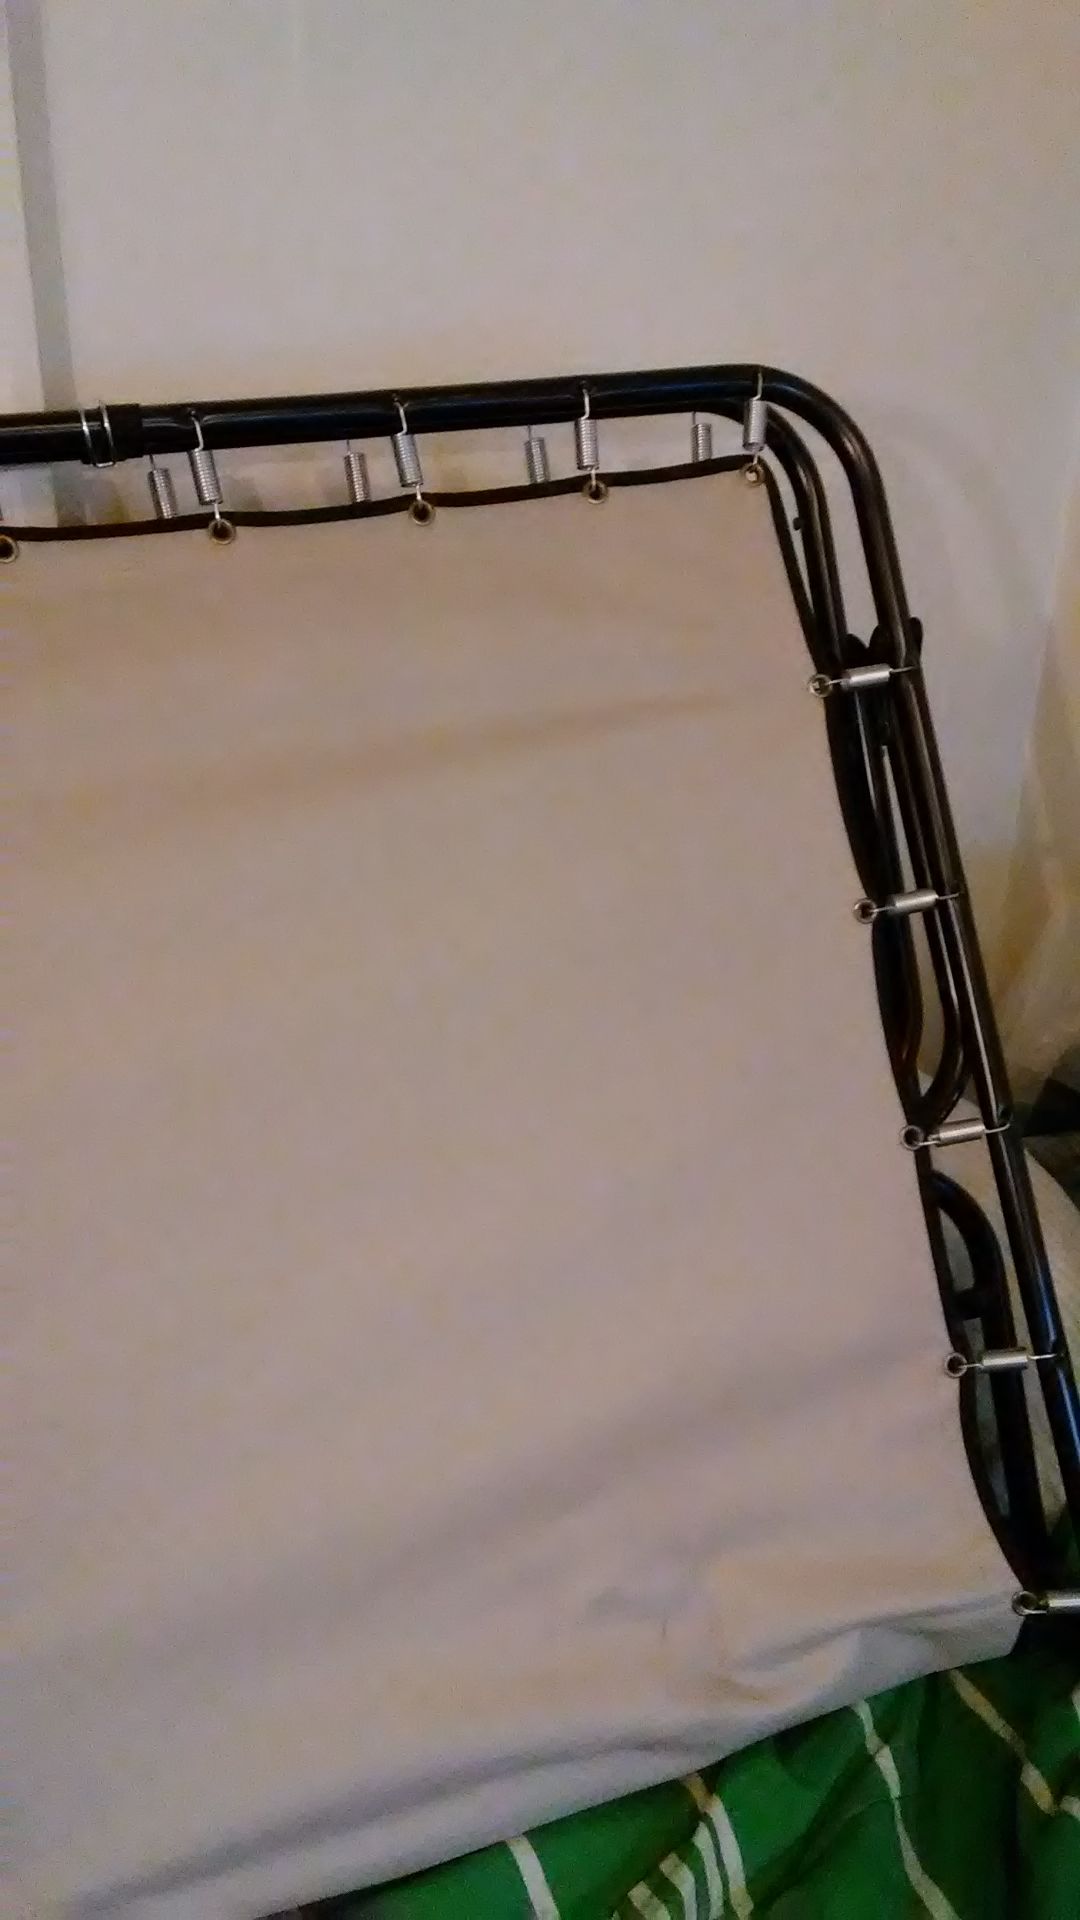 Fold-up cot bed